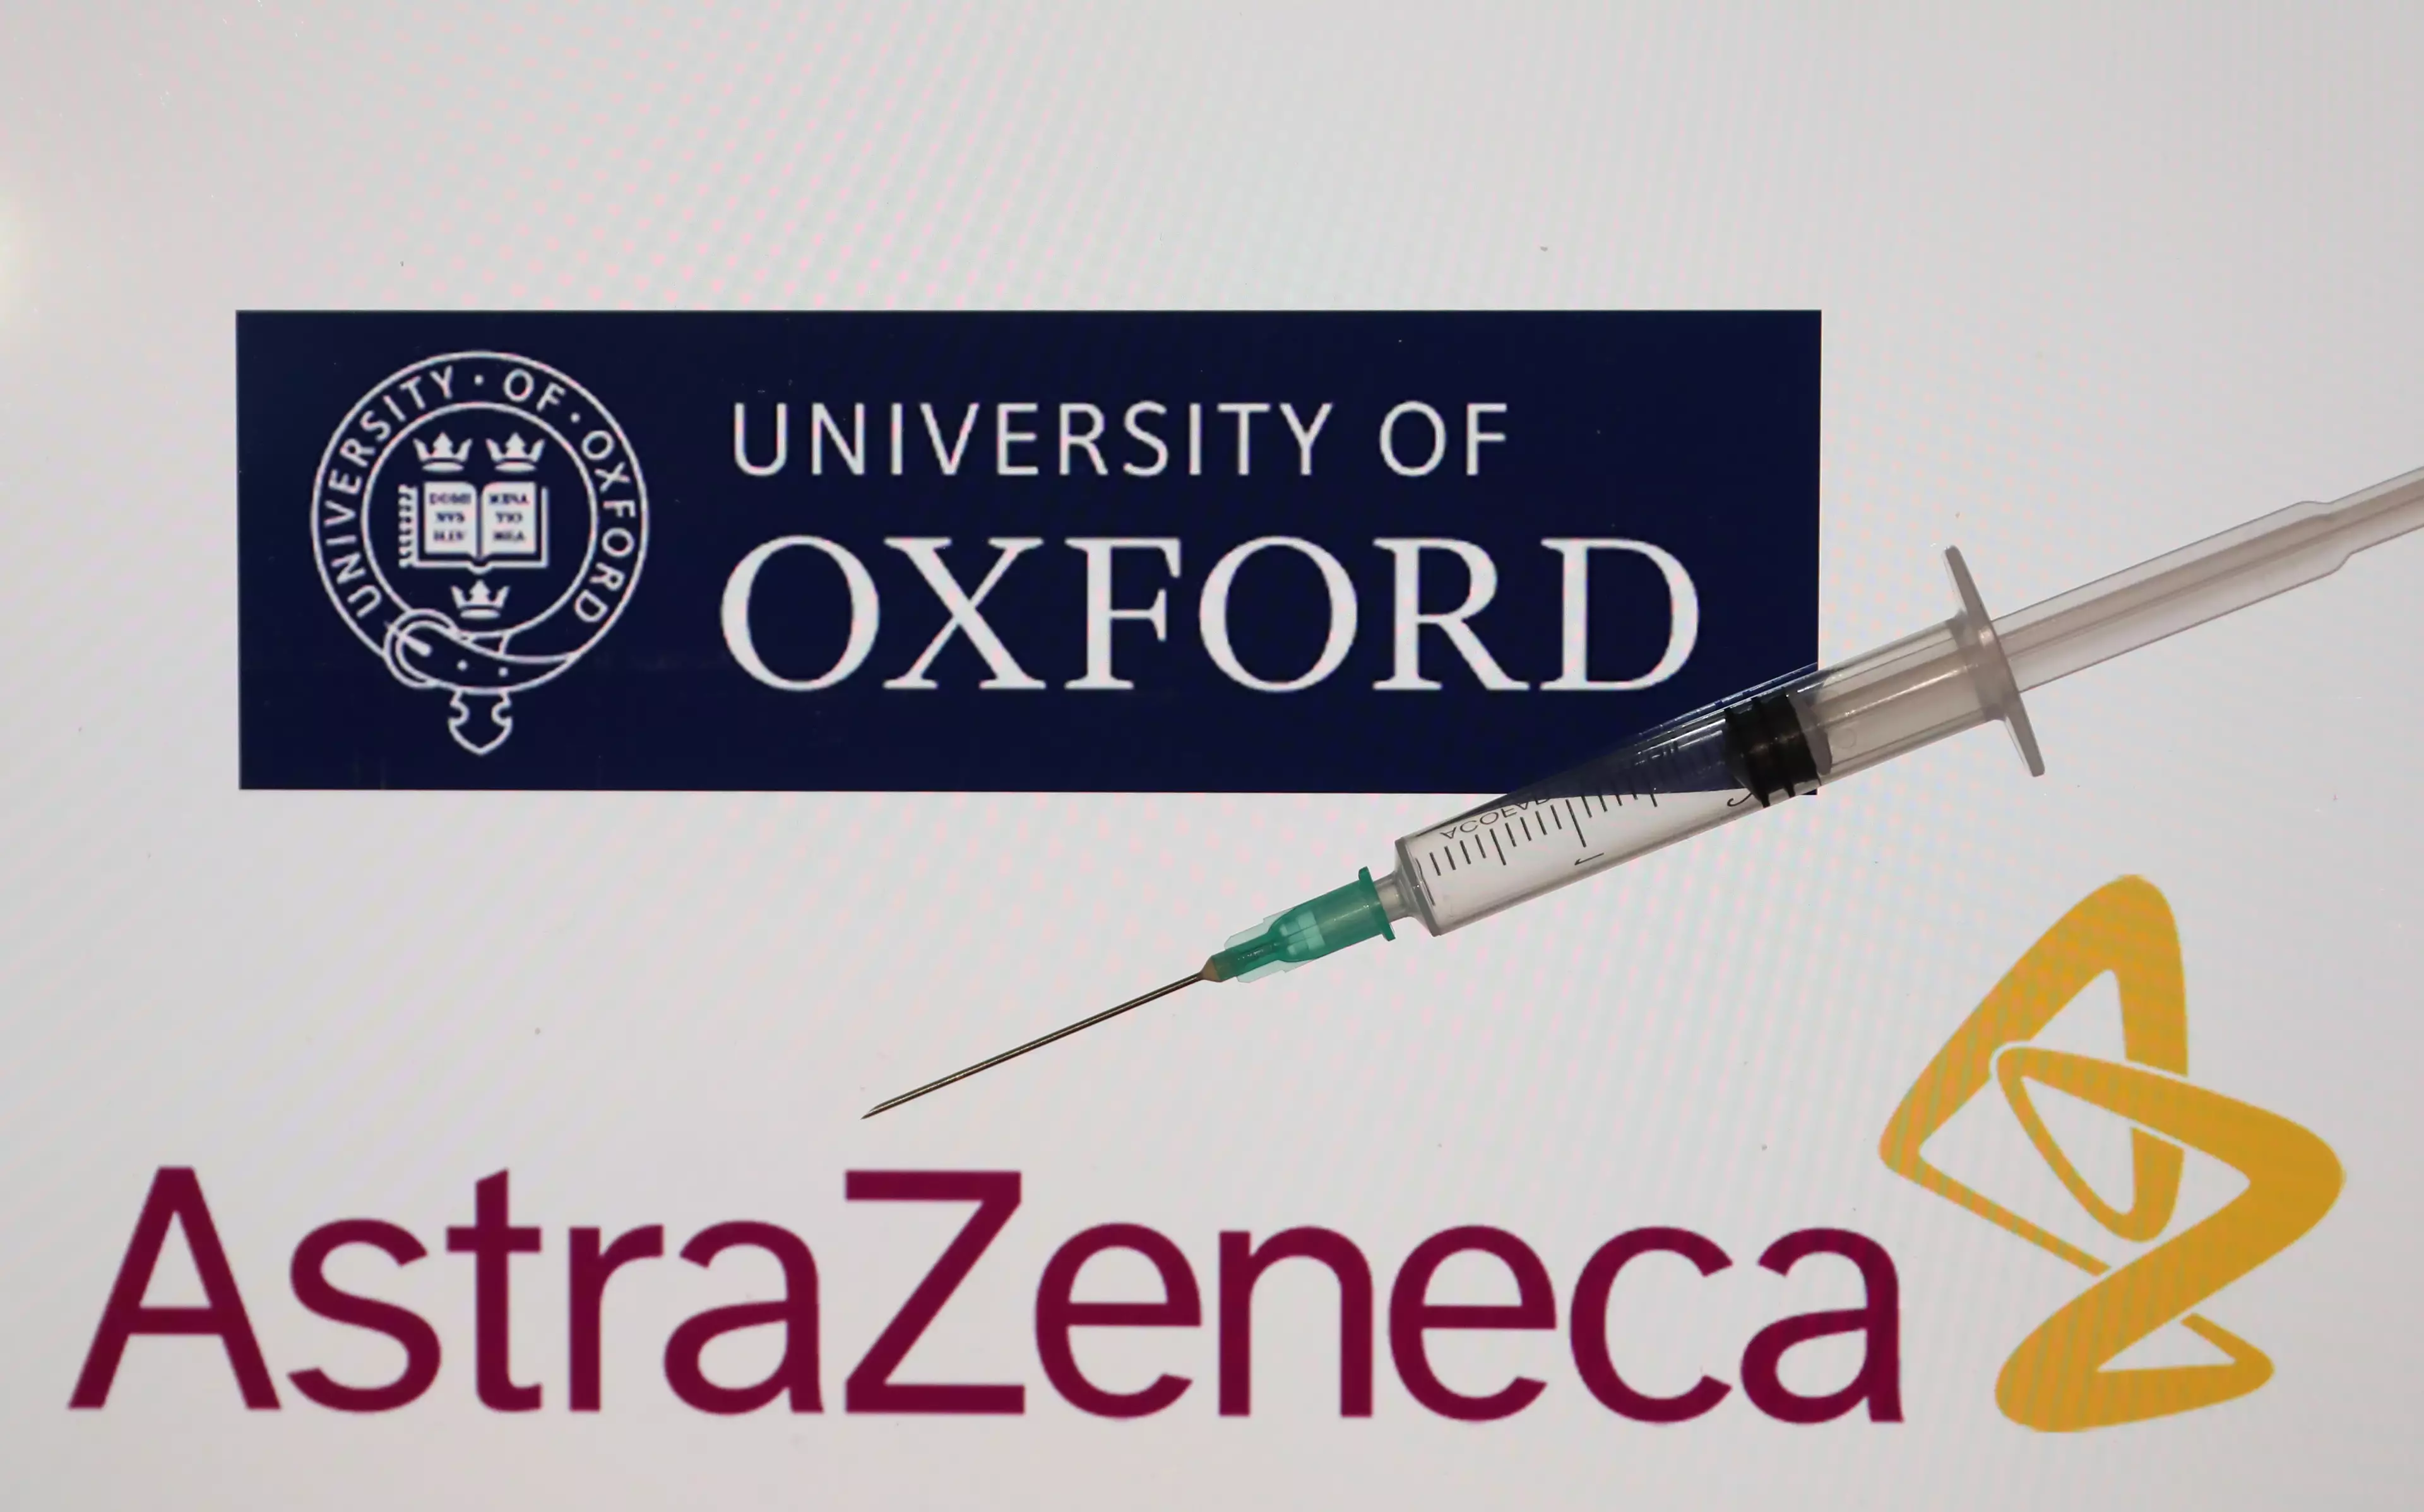 The AstraZeneca vaccine was approved this morning (